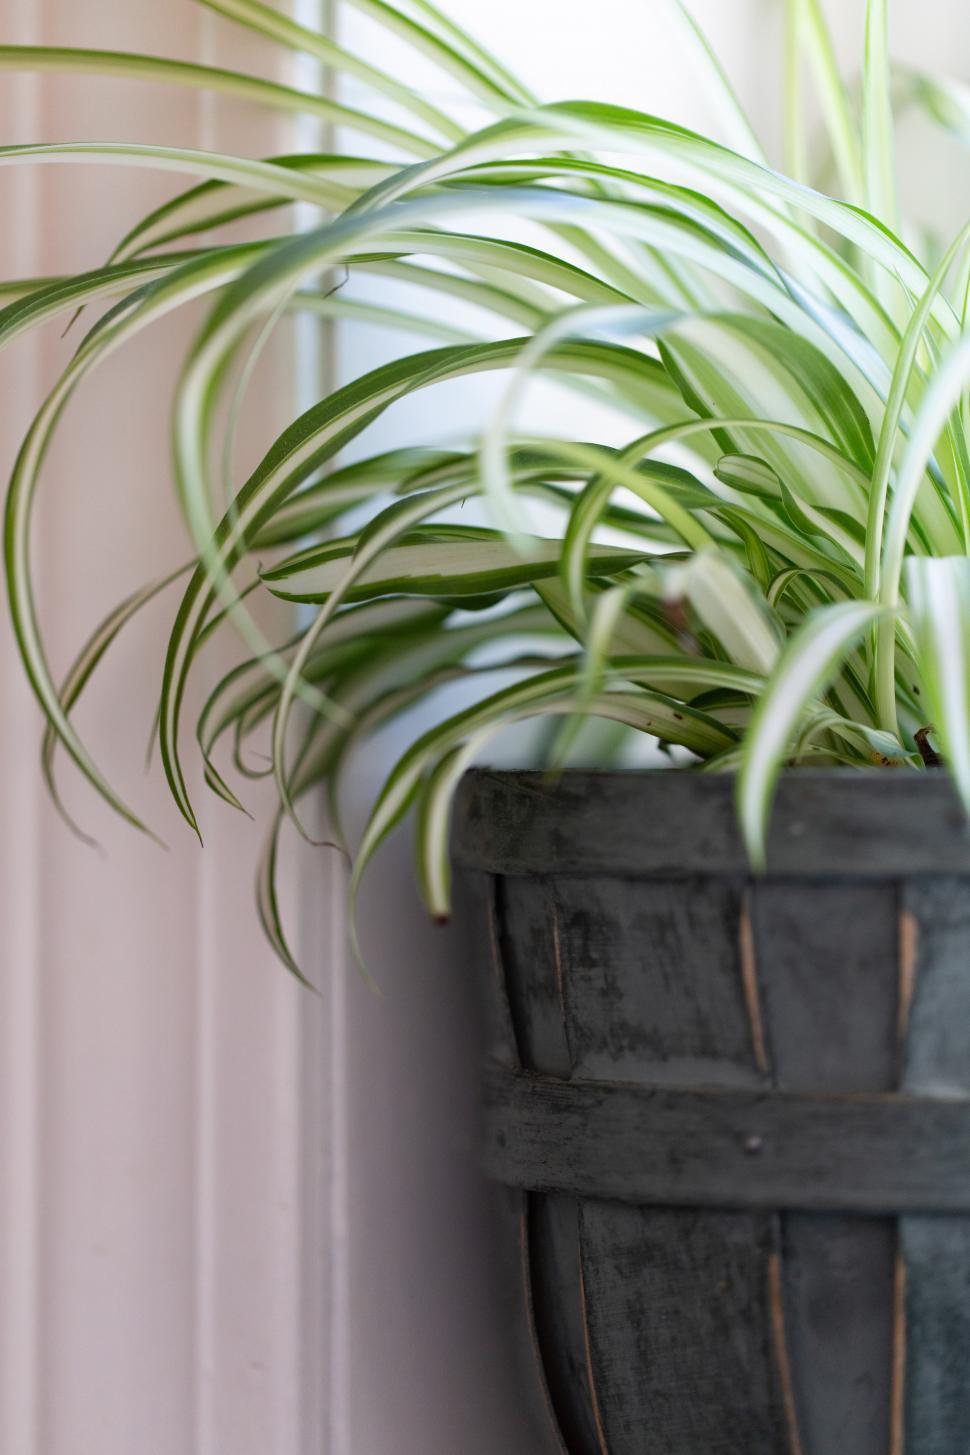 Free Image of A plant in a pot 